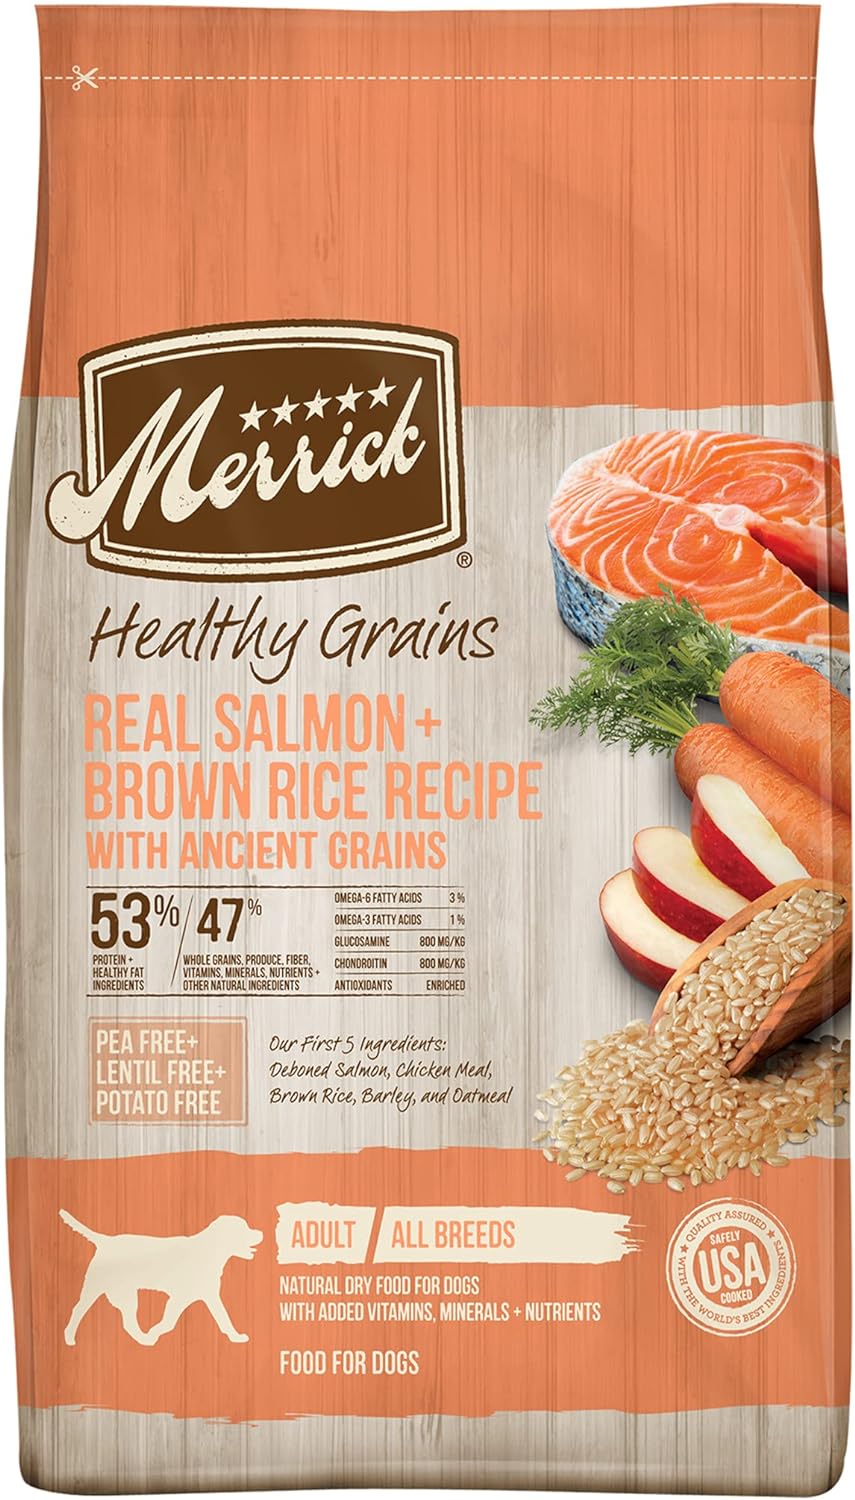 Merrick Healthy Grains Real Salmon + Brown Rice Recipe with Ancient Grains Dry Dog Food – Gallery Image 1